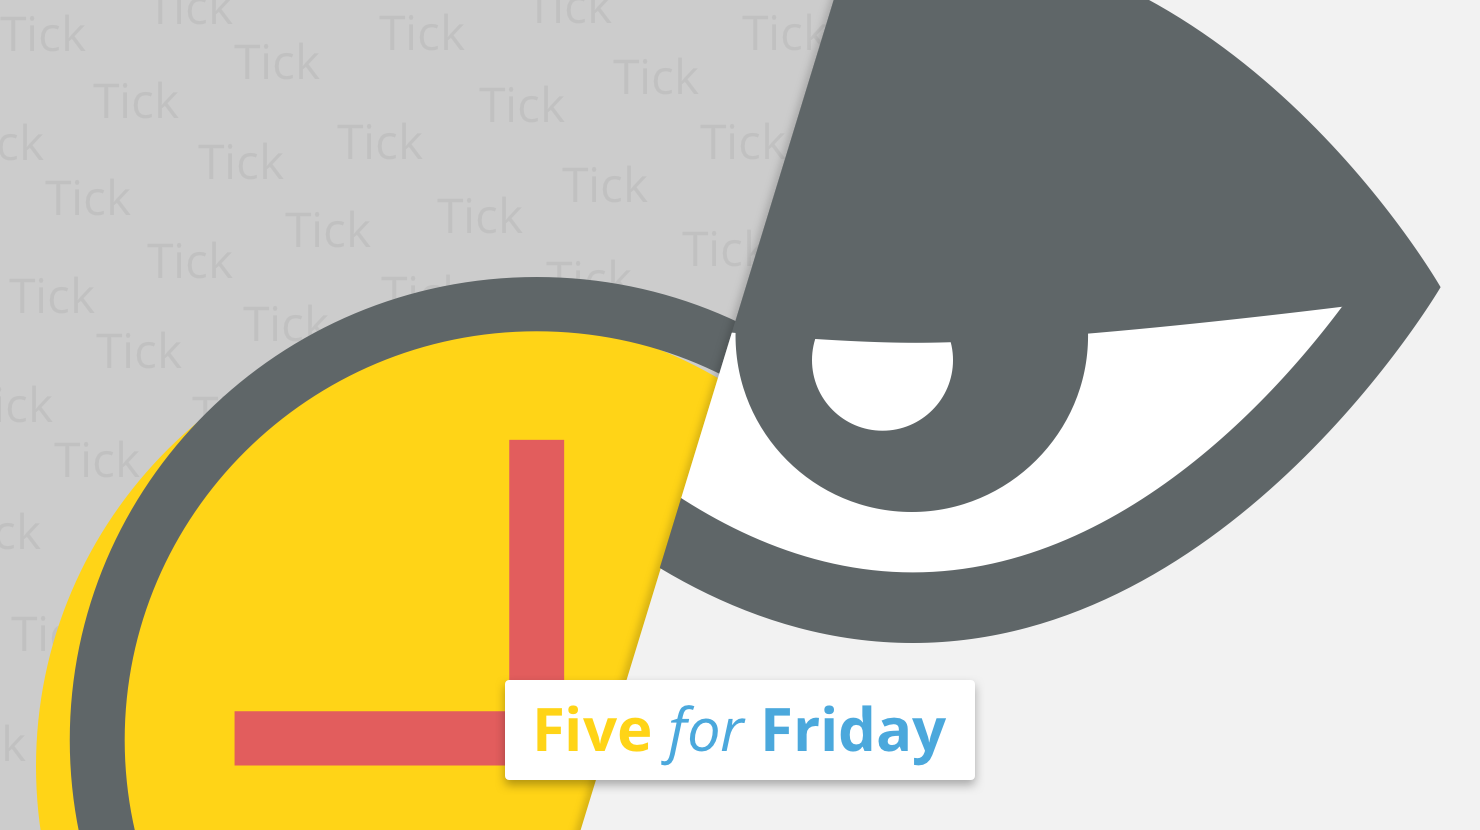 Five for Friday: Bored at work